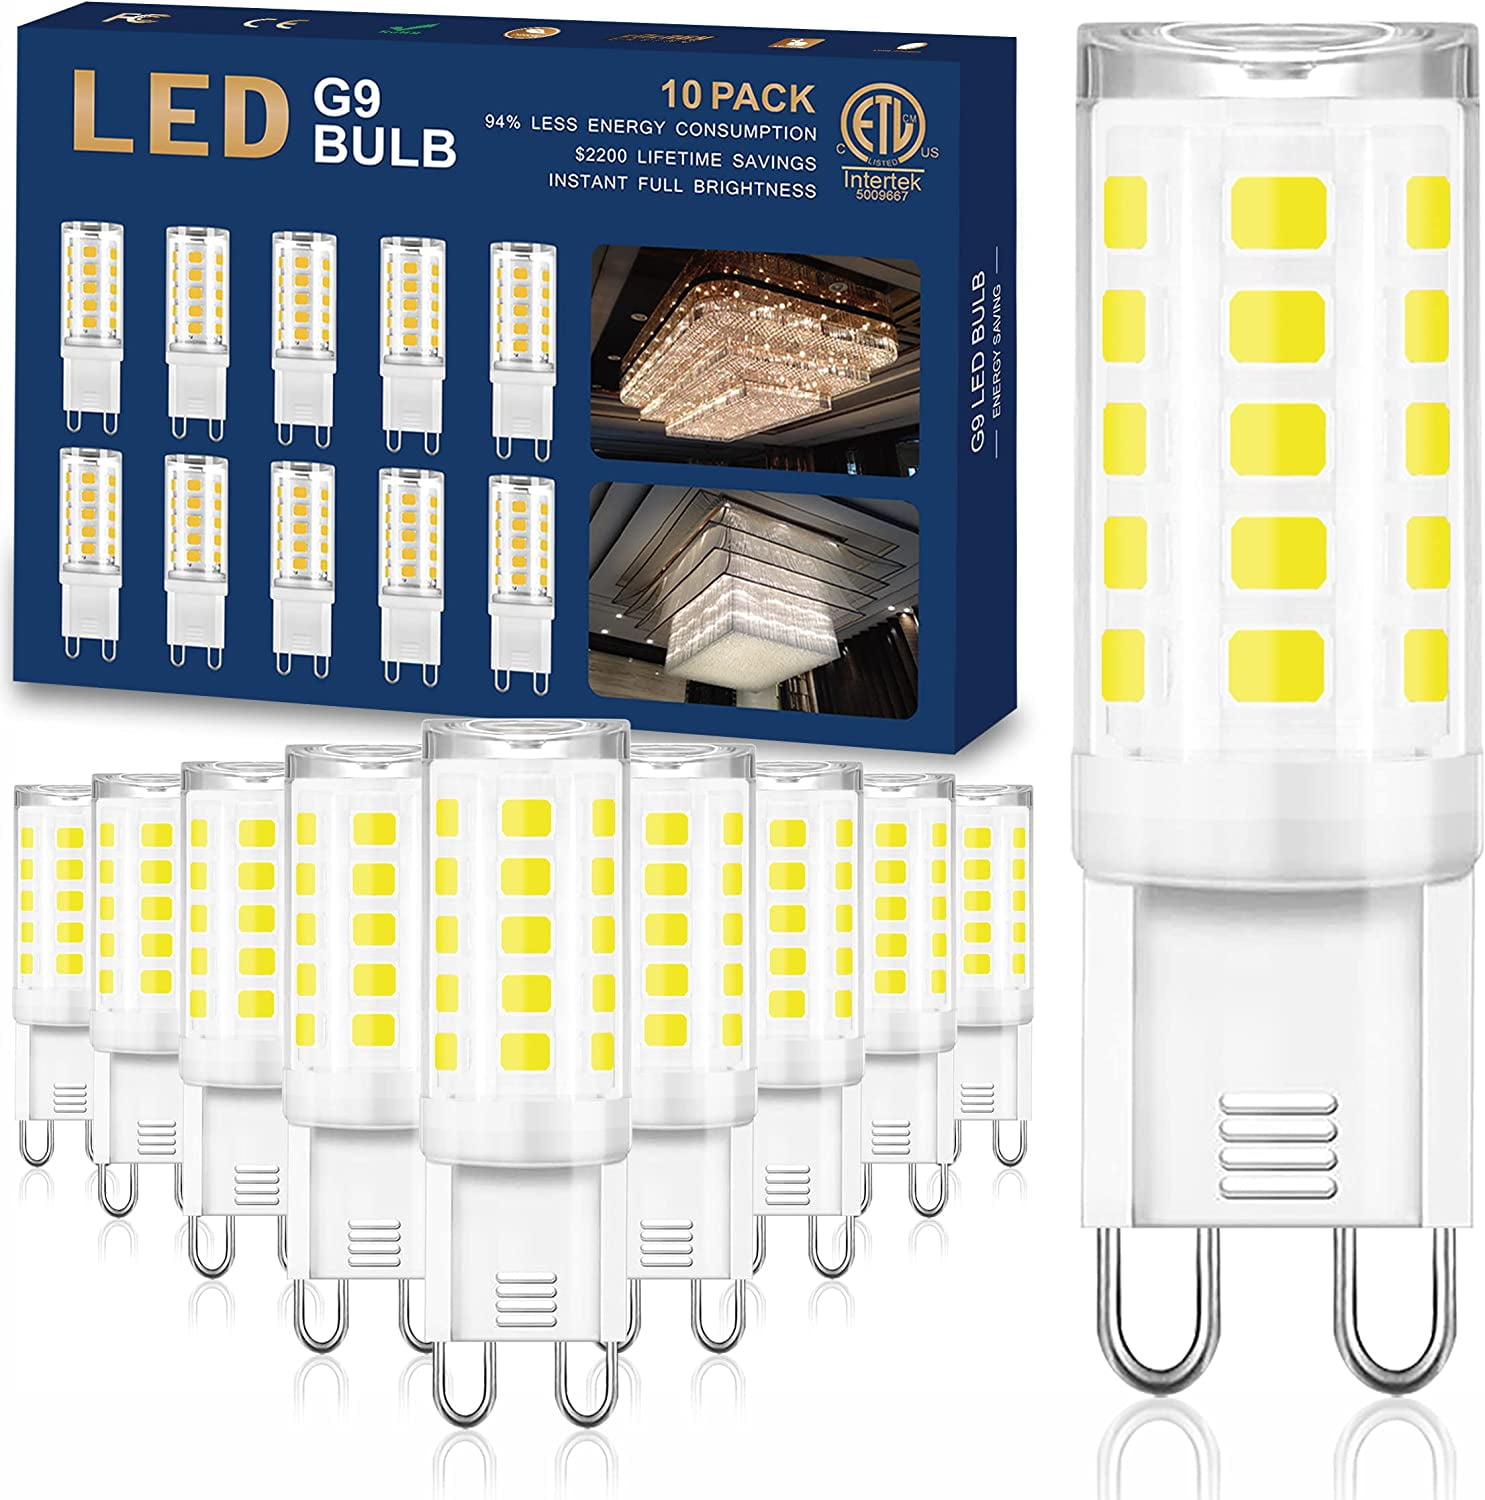 Subjectief kubus bloem 10 Pack G9 LED Bulb T4 Chandelier Light Bulbs 5000K Daylight, 4W (40W  Halogen Replacement) G9 Bi Pin Ceramic Base, 120V AC 360°Beam Angle for,  Barthroom Lamp, Crystal Wall Lamp Not-Dimmable -